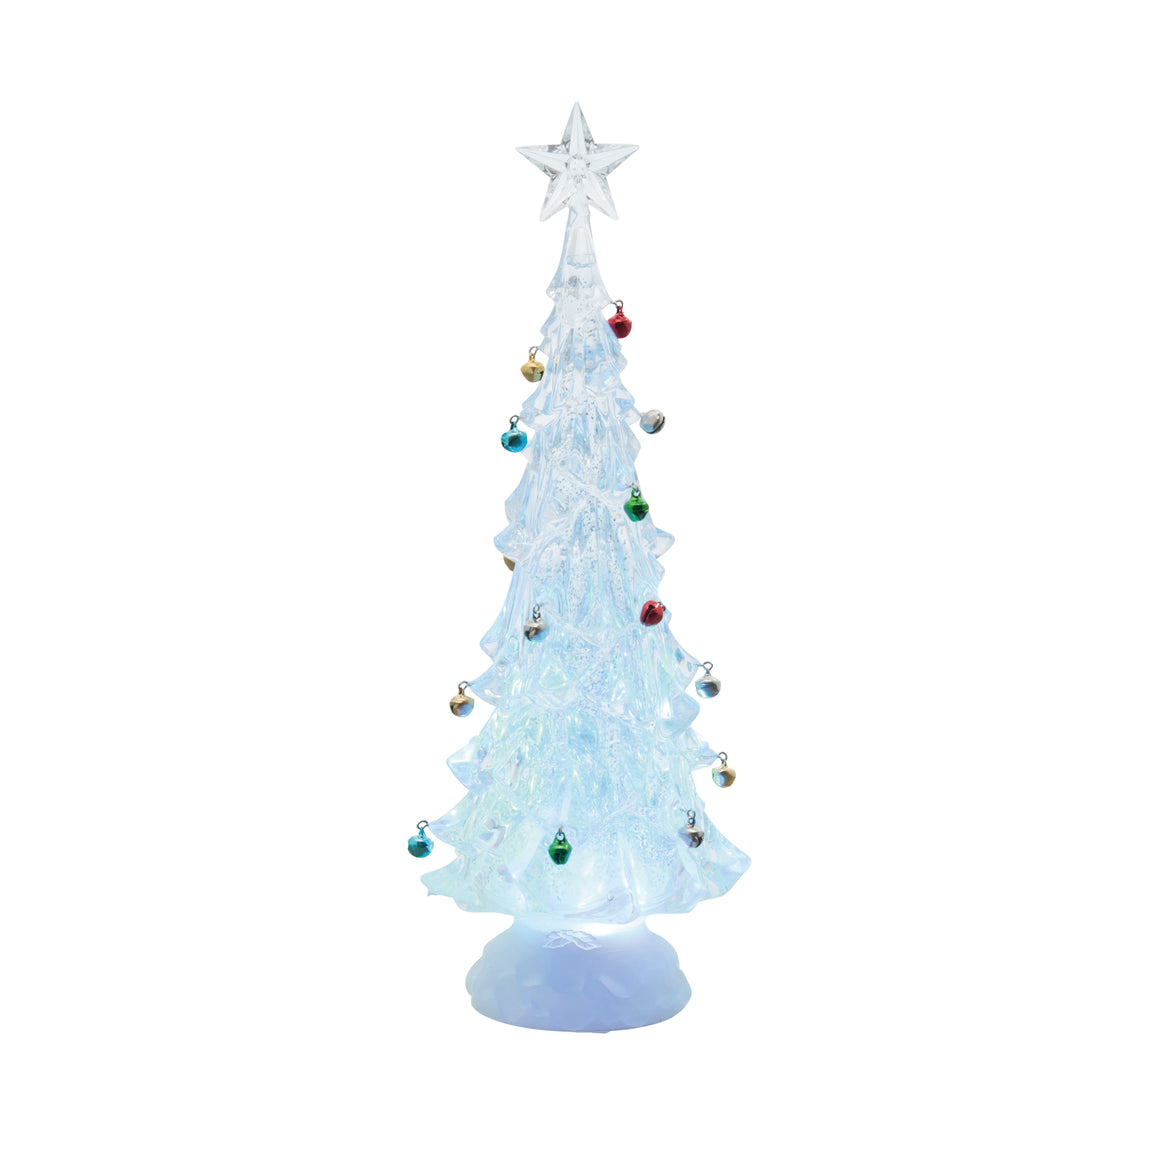 Christmas Snow Globe Water Lantern - Decorated Christmas Tree Water Lantern with Swirling Snow and Jingle Bell Ornaments, 13 Inches High x 4 Inches Wide, Battery Operated